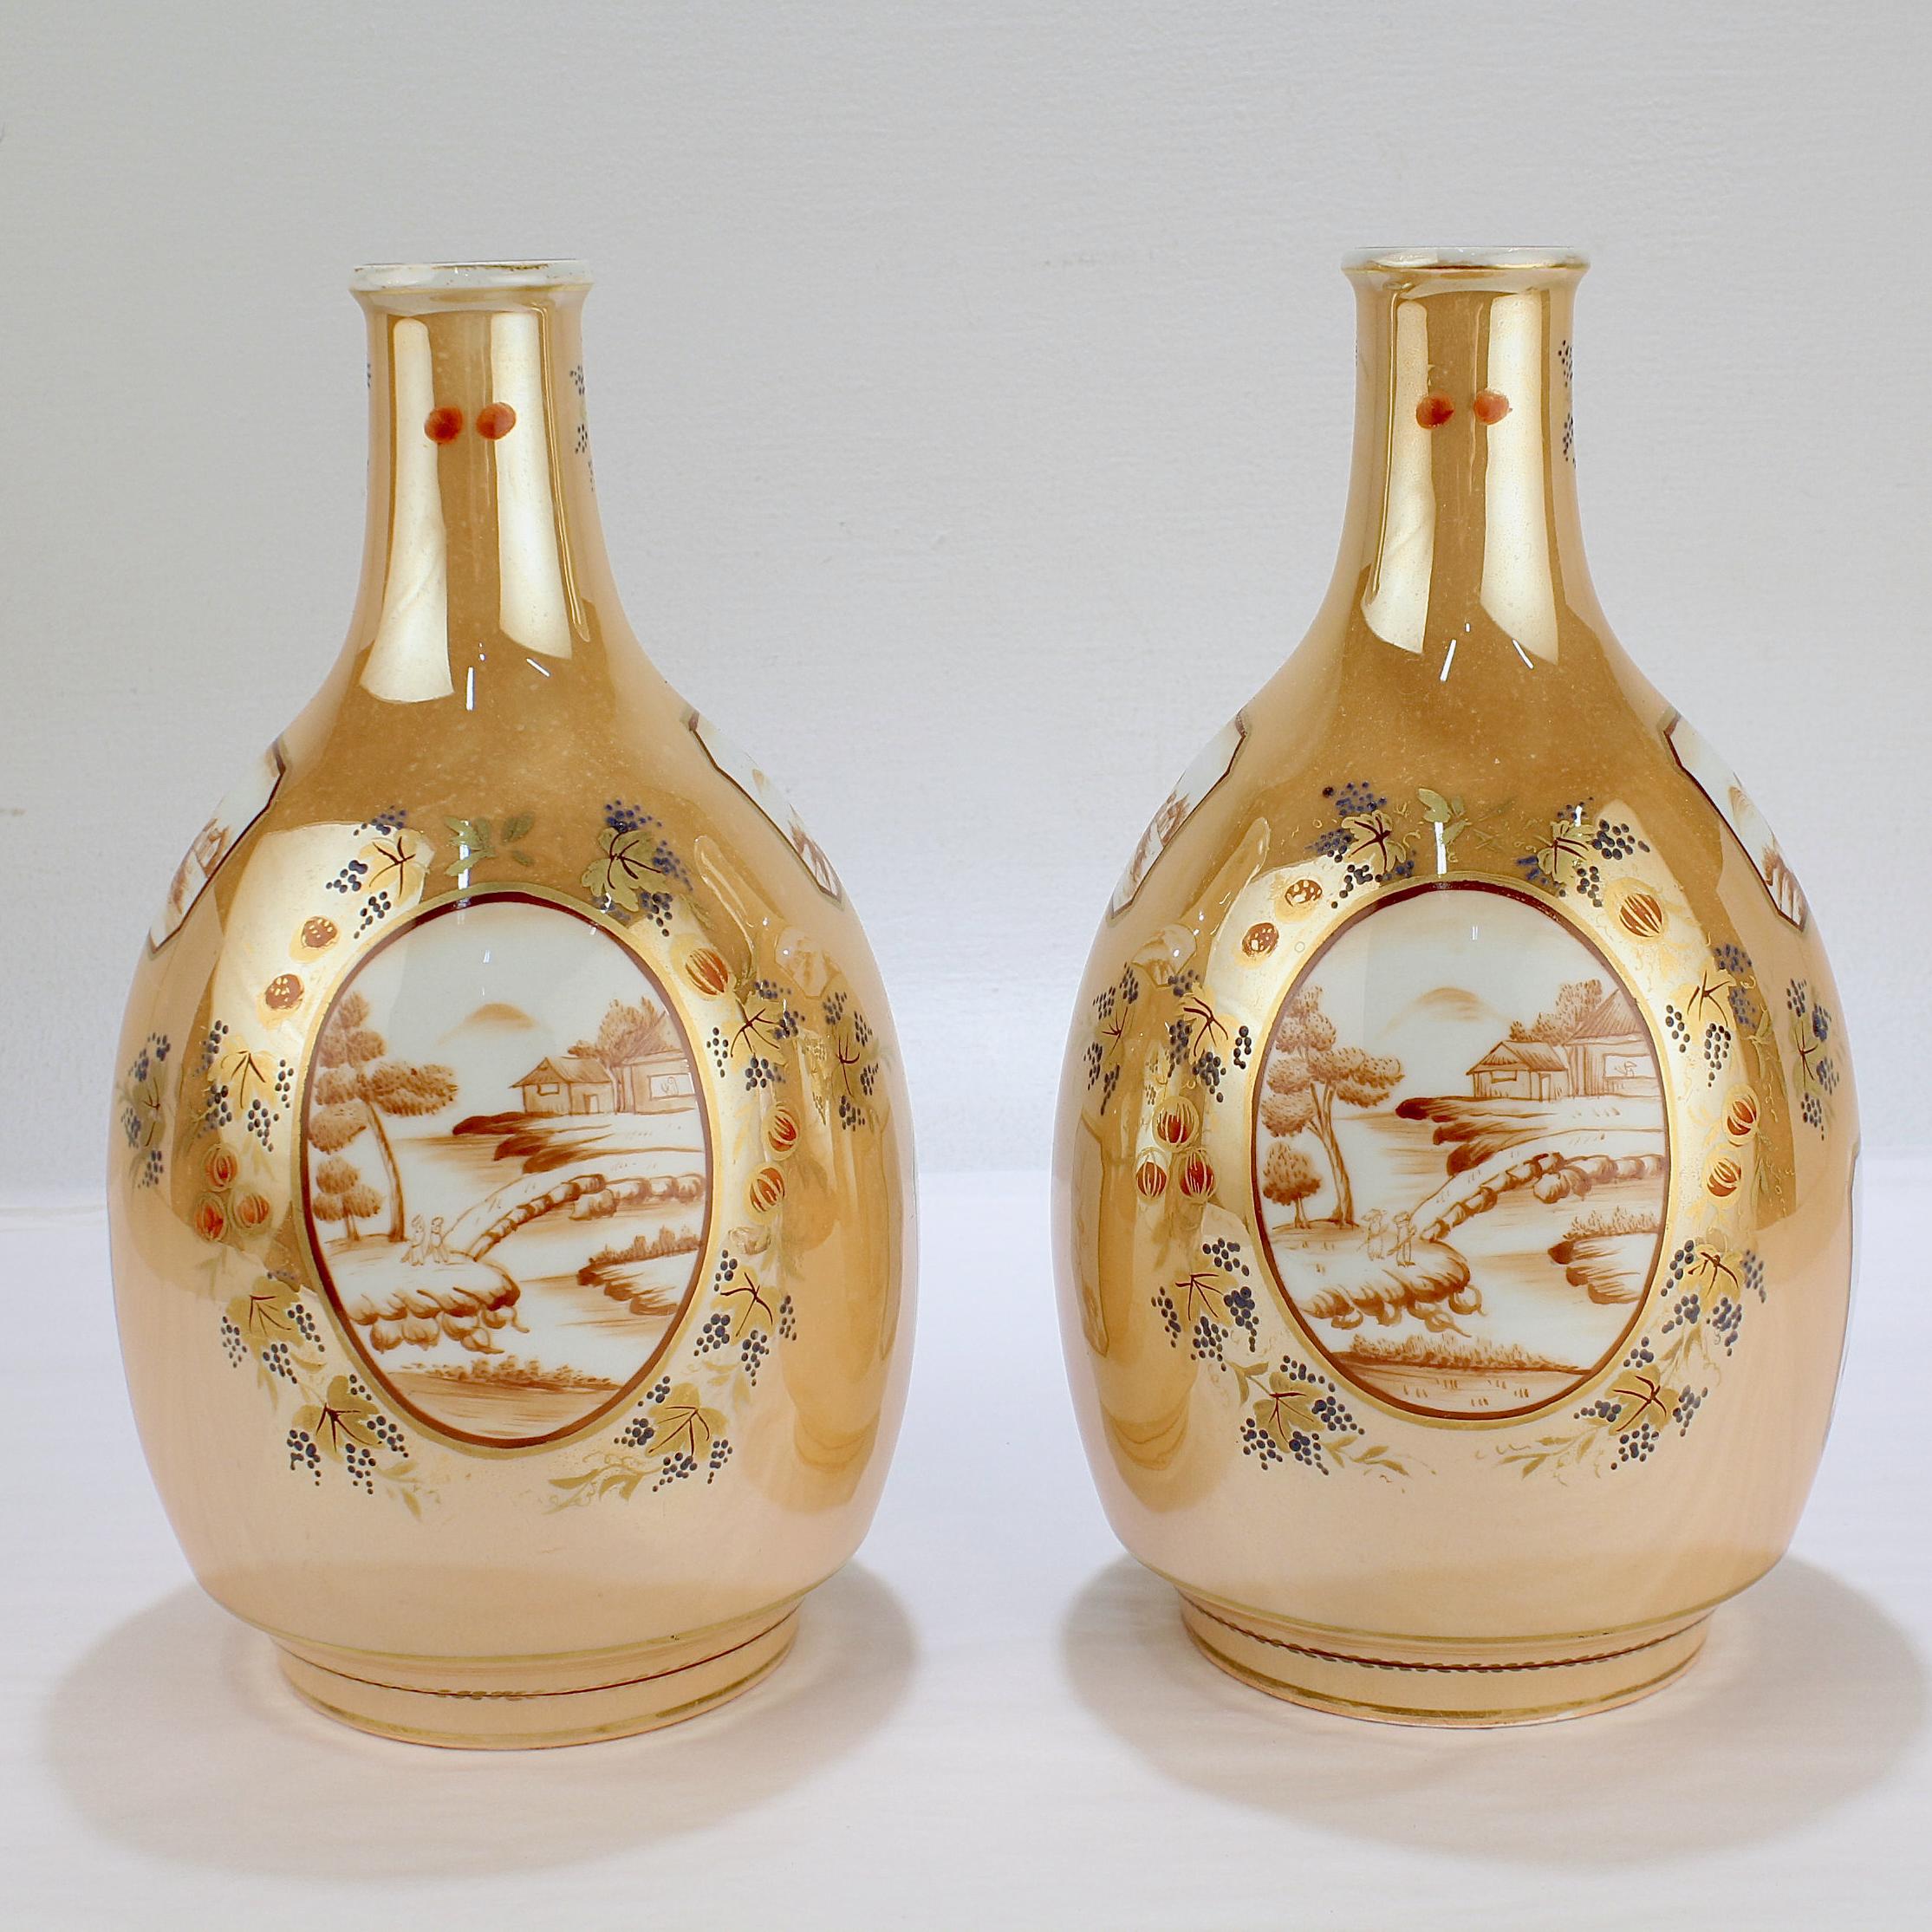 A fine pair of Chinese export style bottle vases.

By the Samson et Cie Porcelain Manufactory. 

With chinoiserie decorated cartouches to all sides, a light brown (almost cafe au lait) ground and hand painted grape and fruit vine decoration.